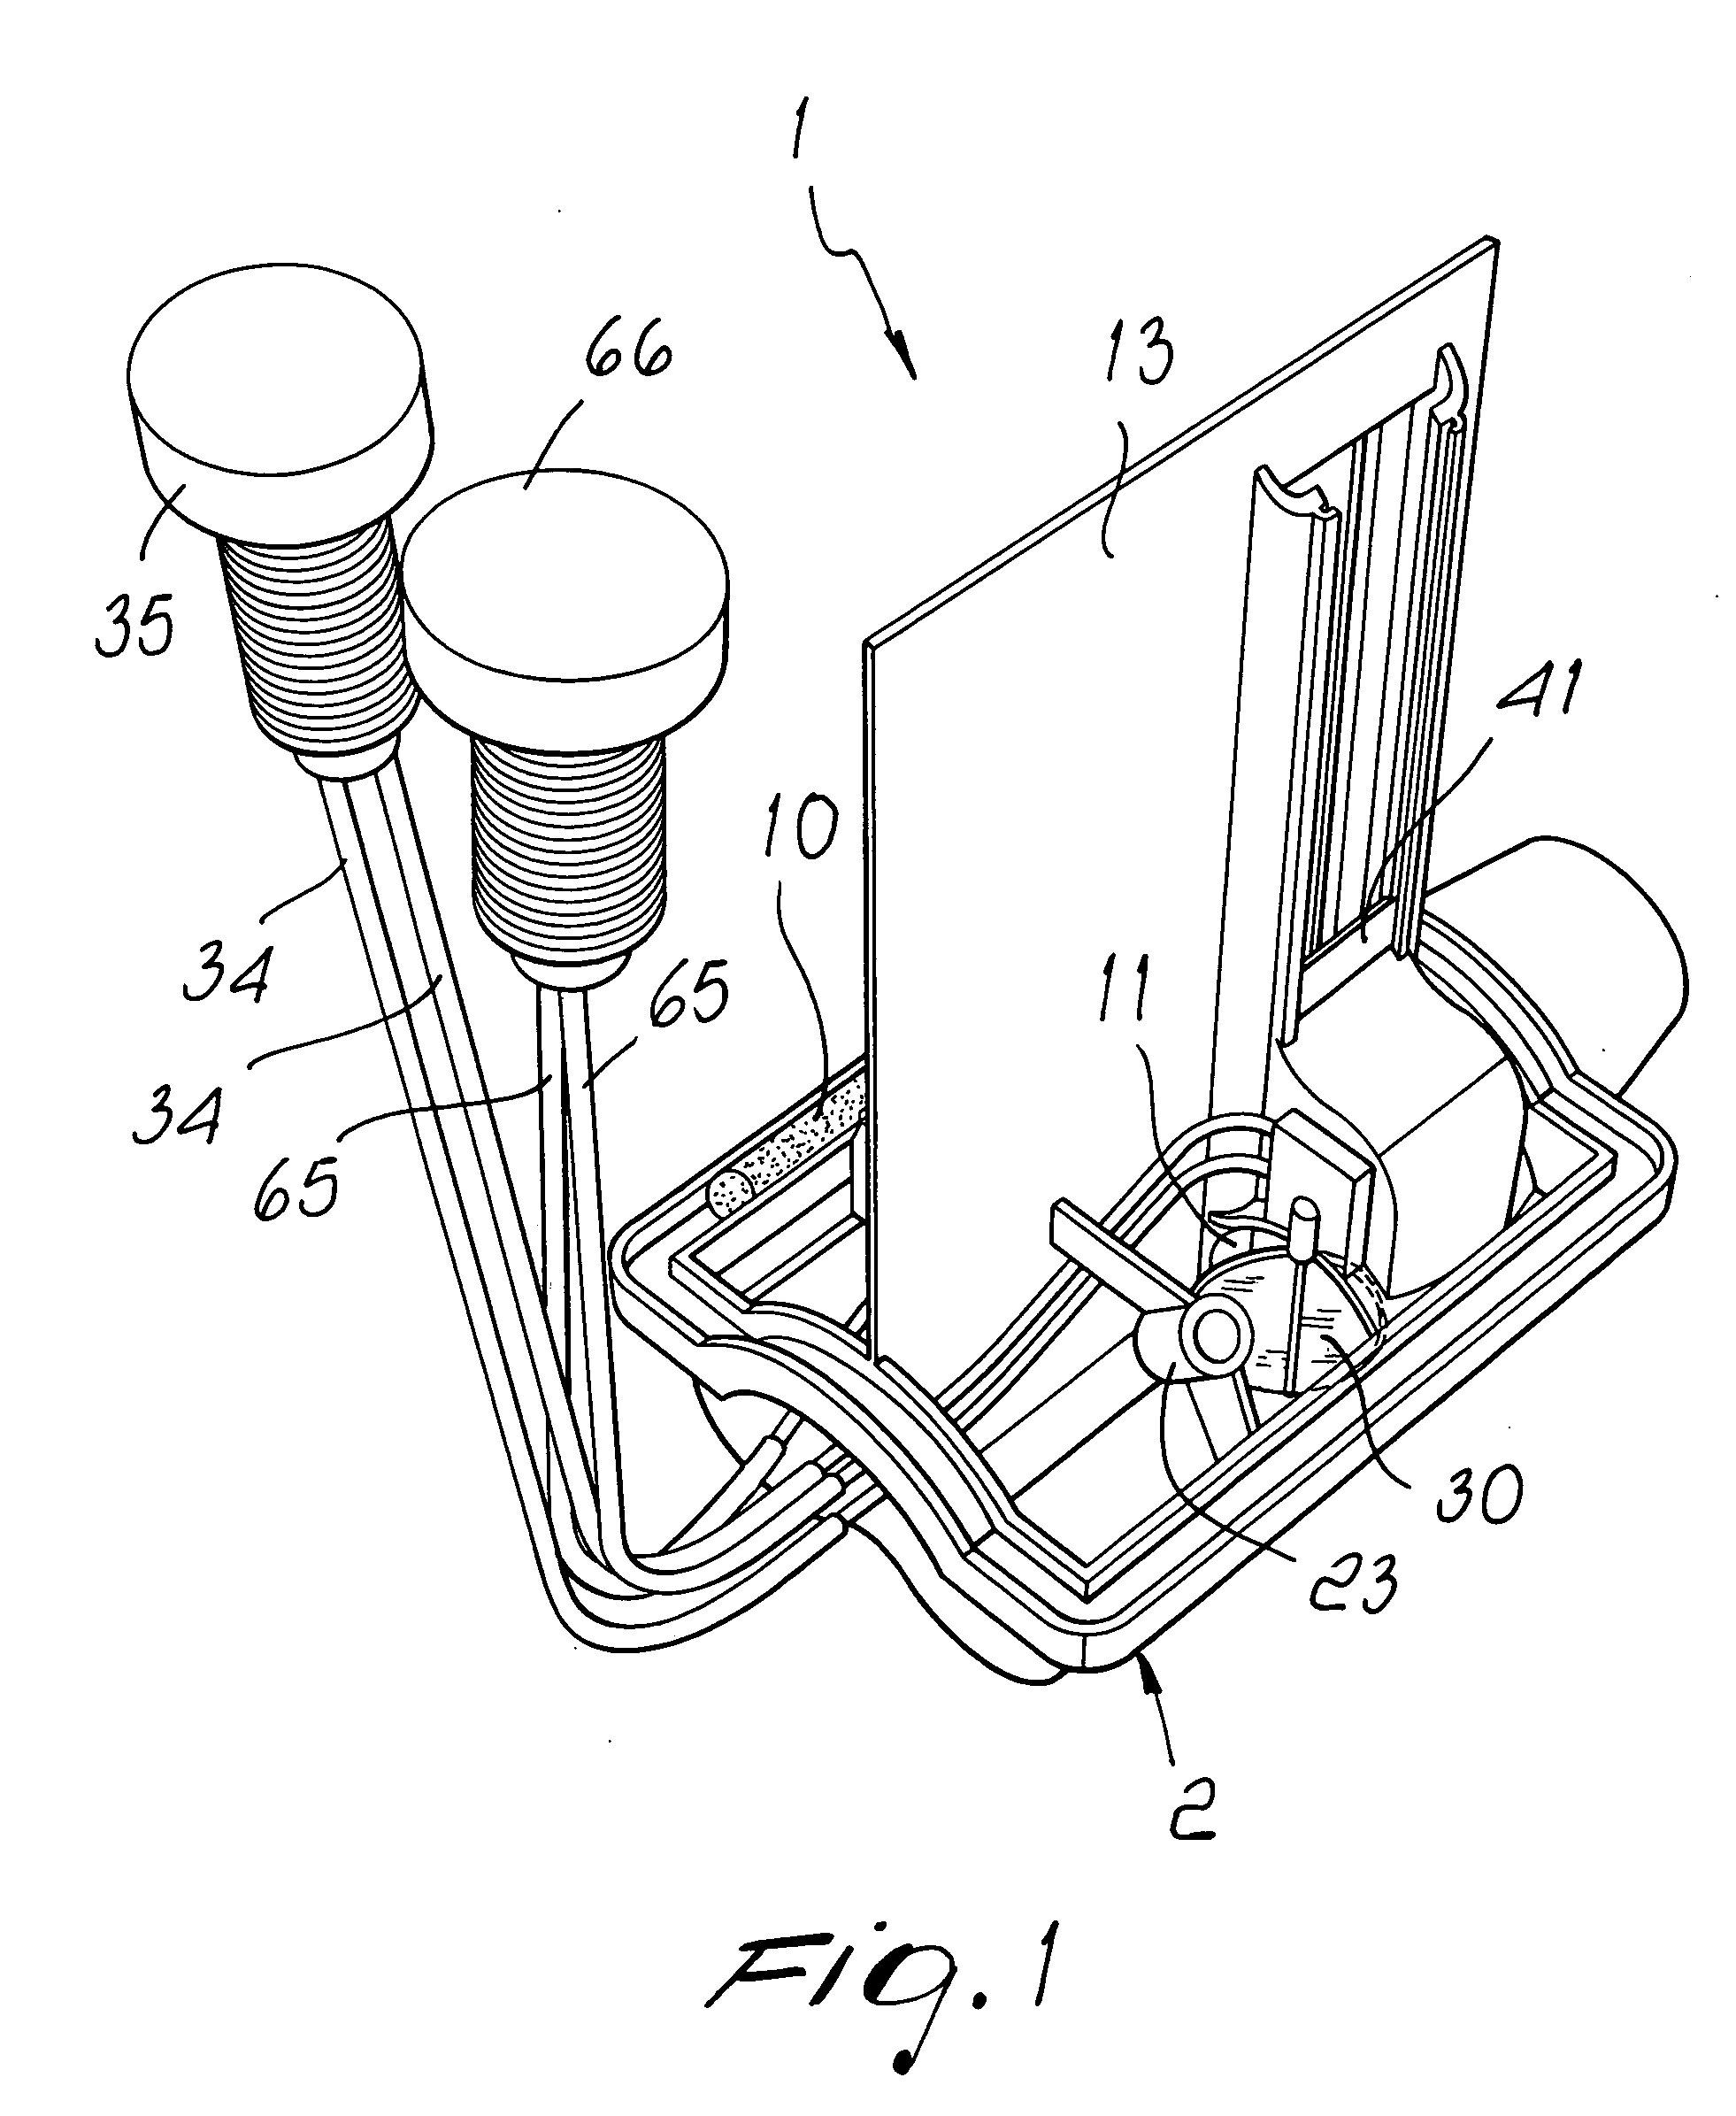 Compact Drain Assembly for Sinks and the Like